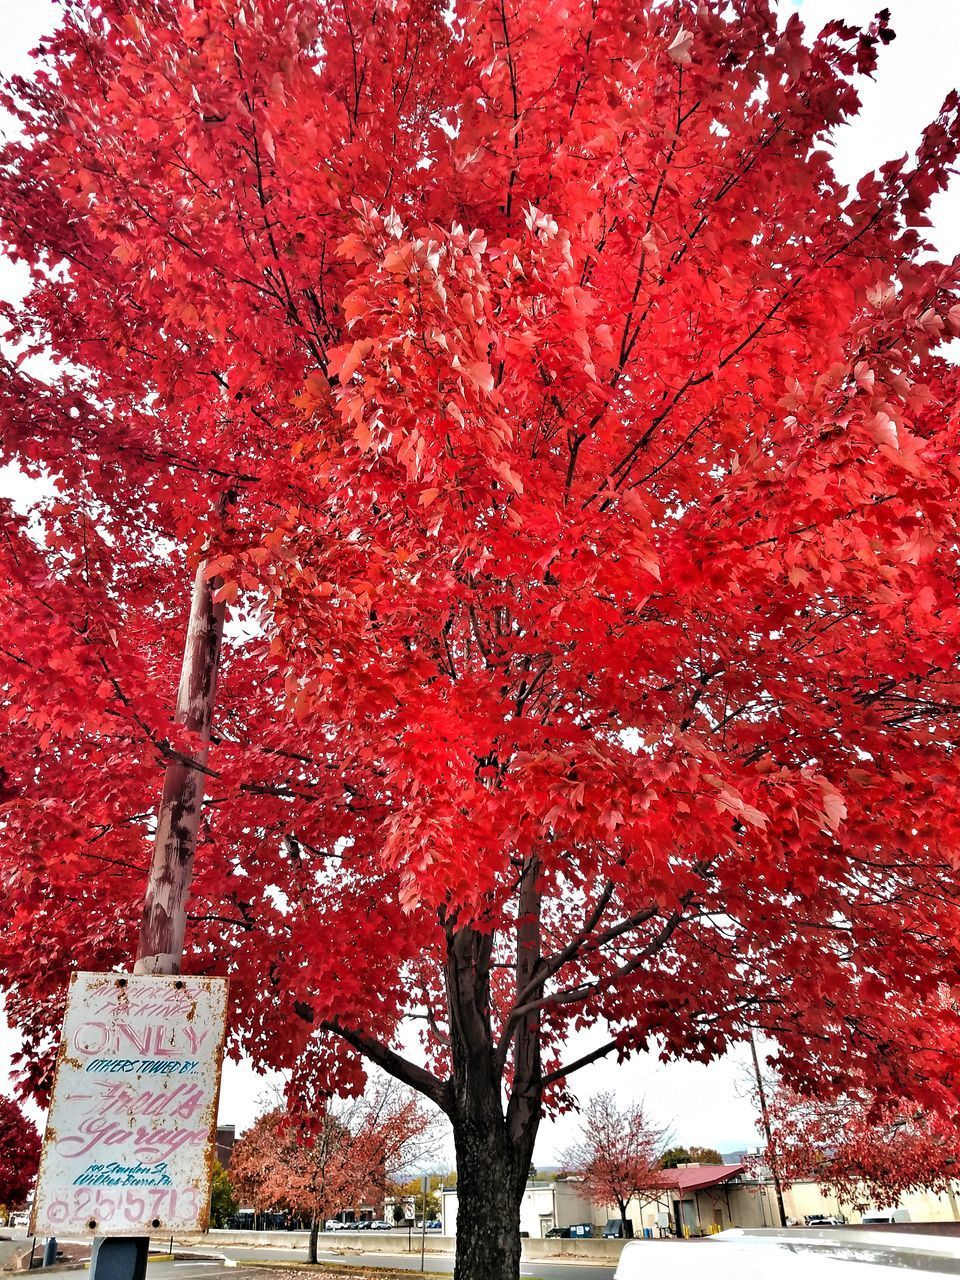 LOW ANGLE VIEW OF TREE AGAINST RED AUTUMN TREES